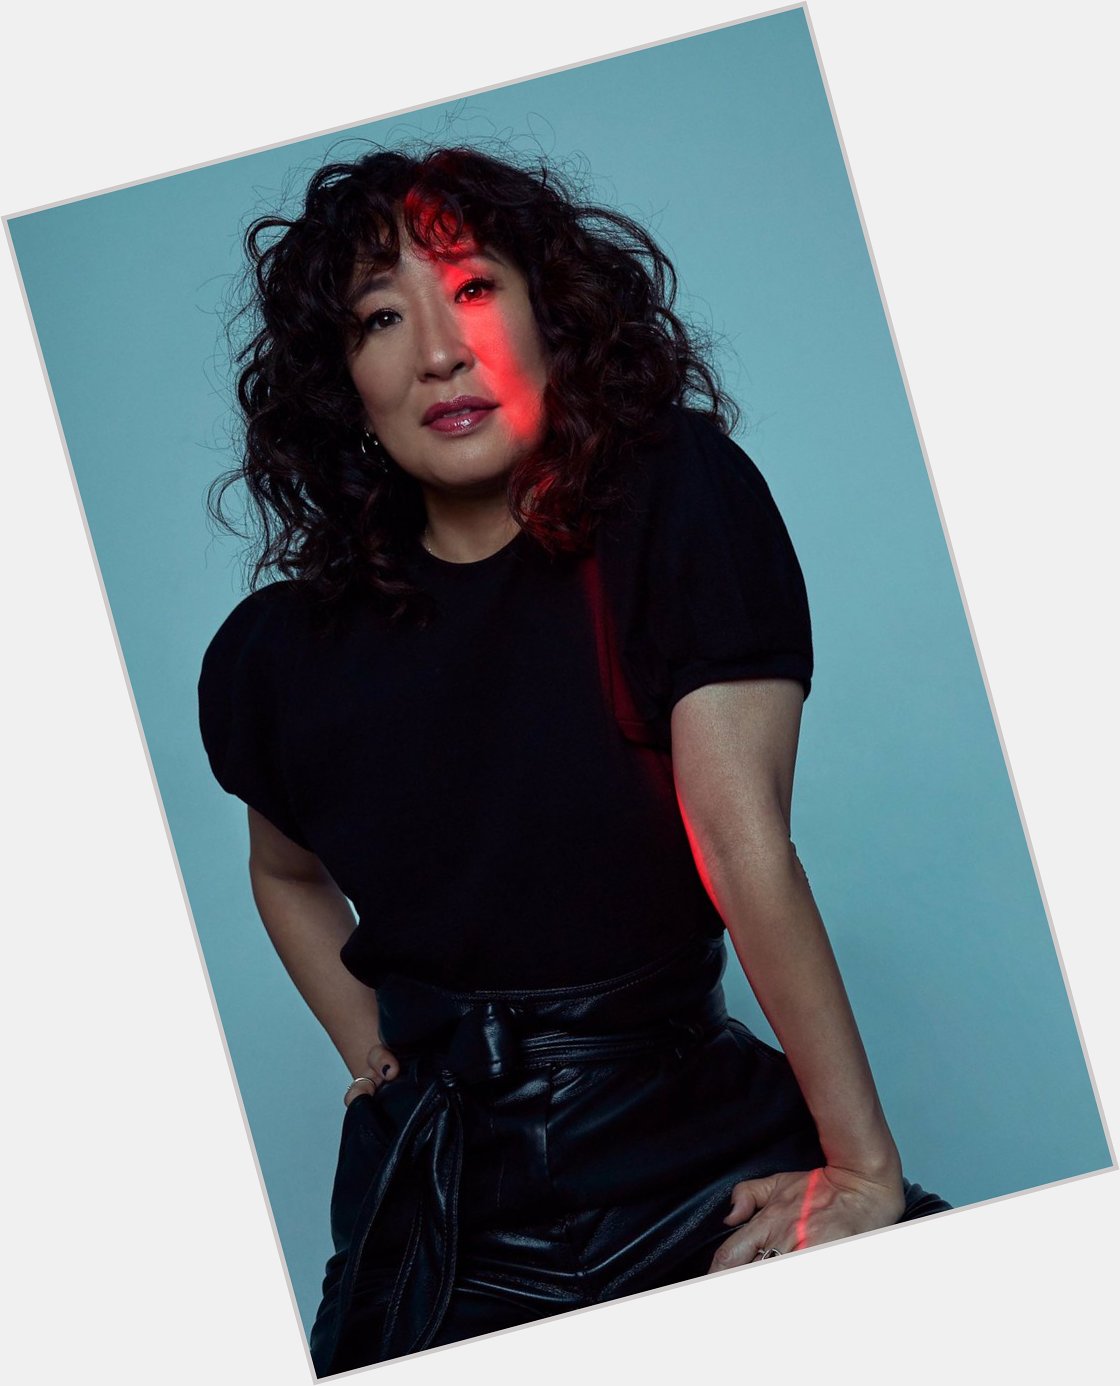 HAPPY BIRTHDAY TO THE RADIANT, STRONG, POWERFUL WOMAN THAT IS SANDRA OH!!!!!! 